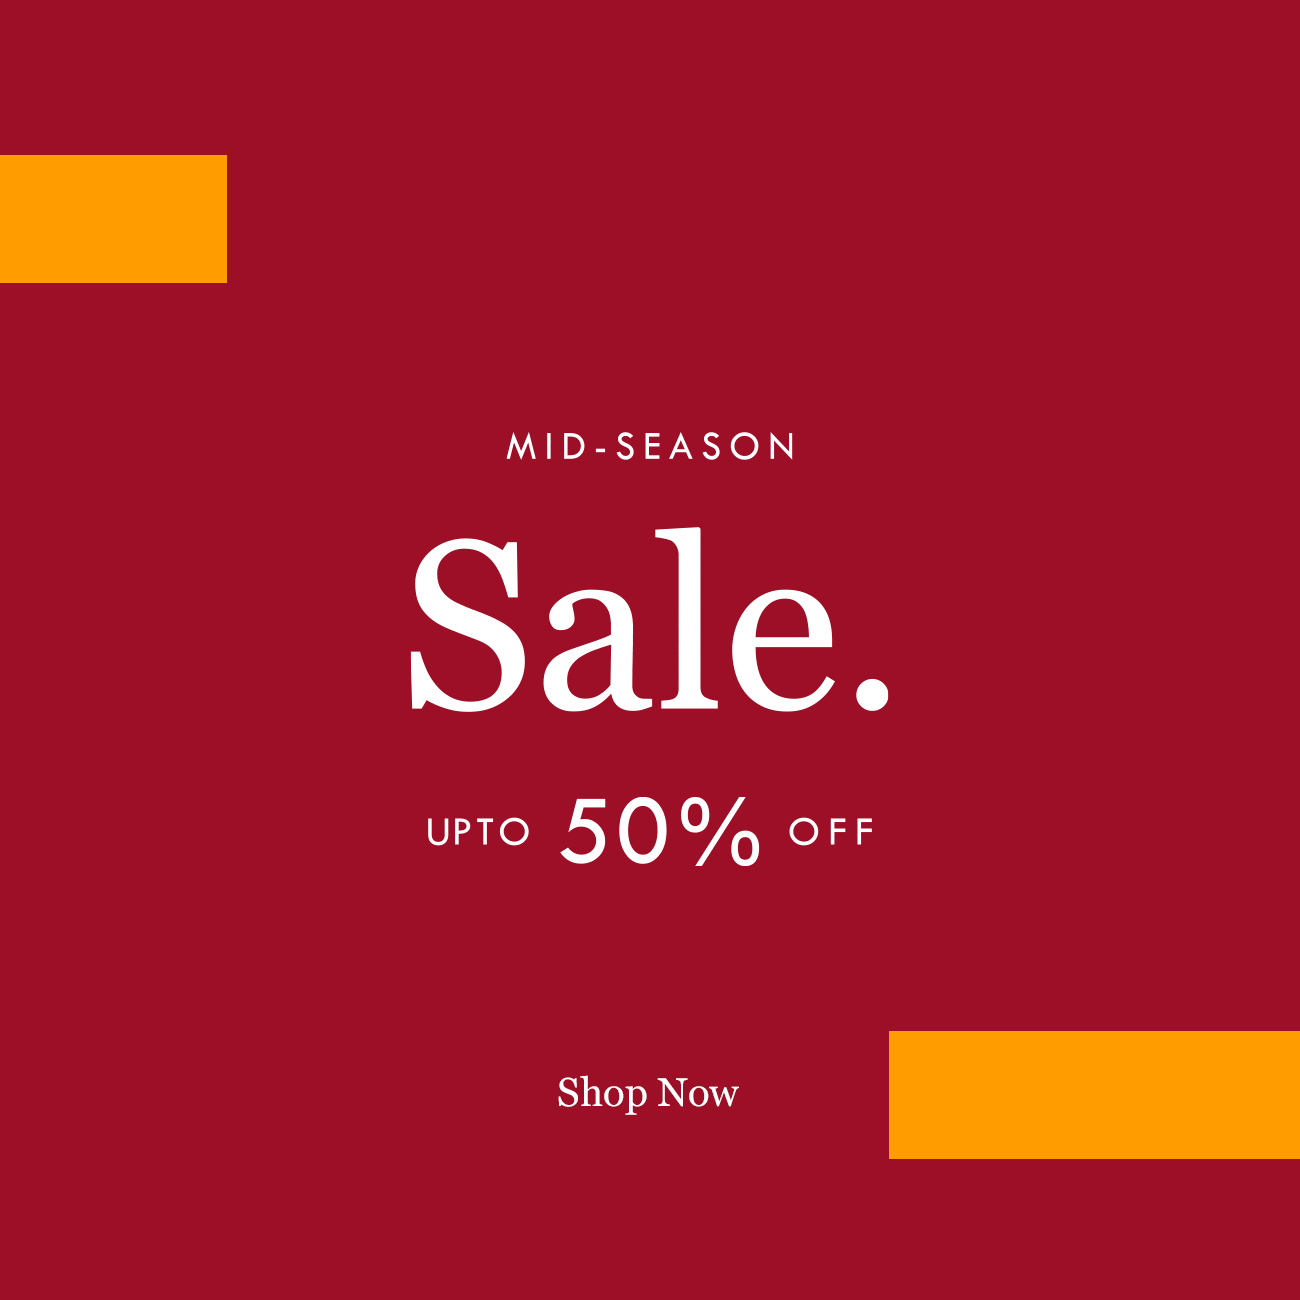 MID-SEASON
Sale. 
UP TO 50% OFF
Shop Now